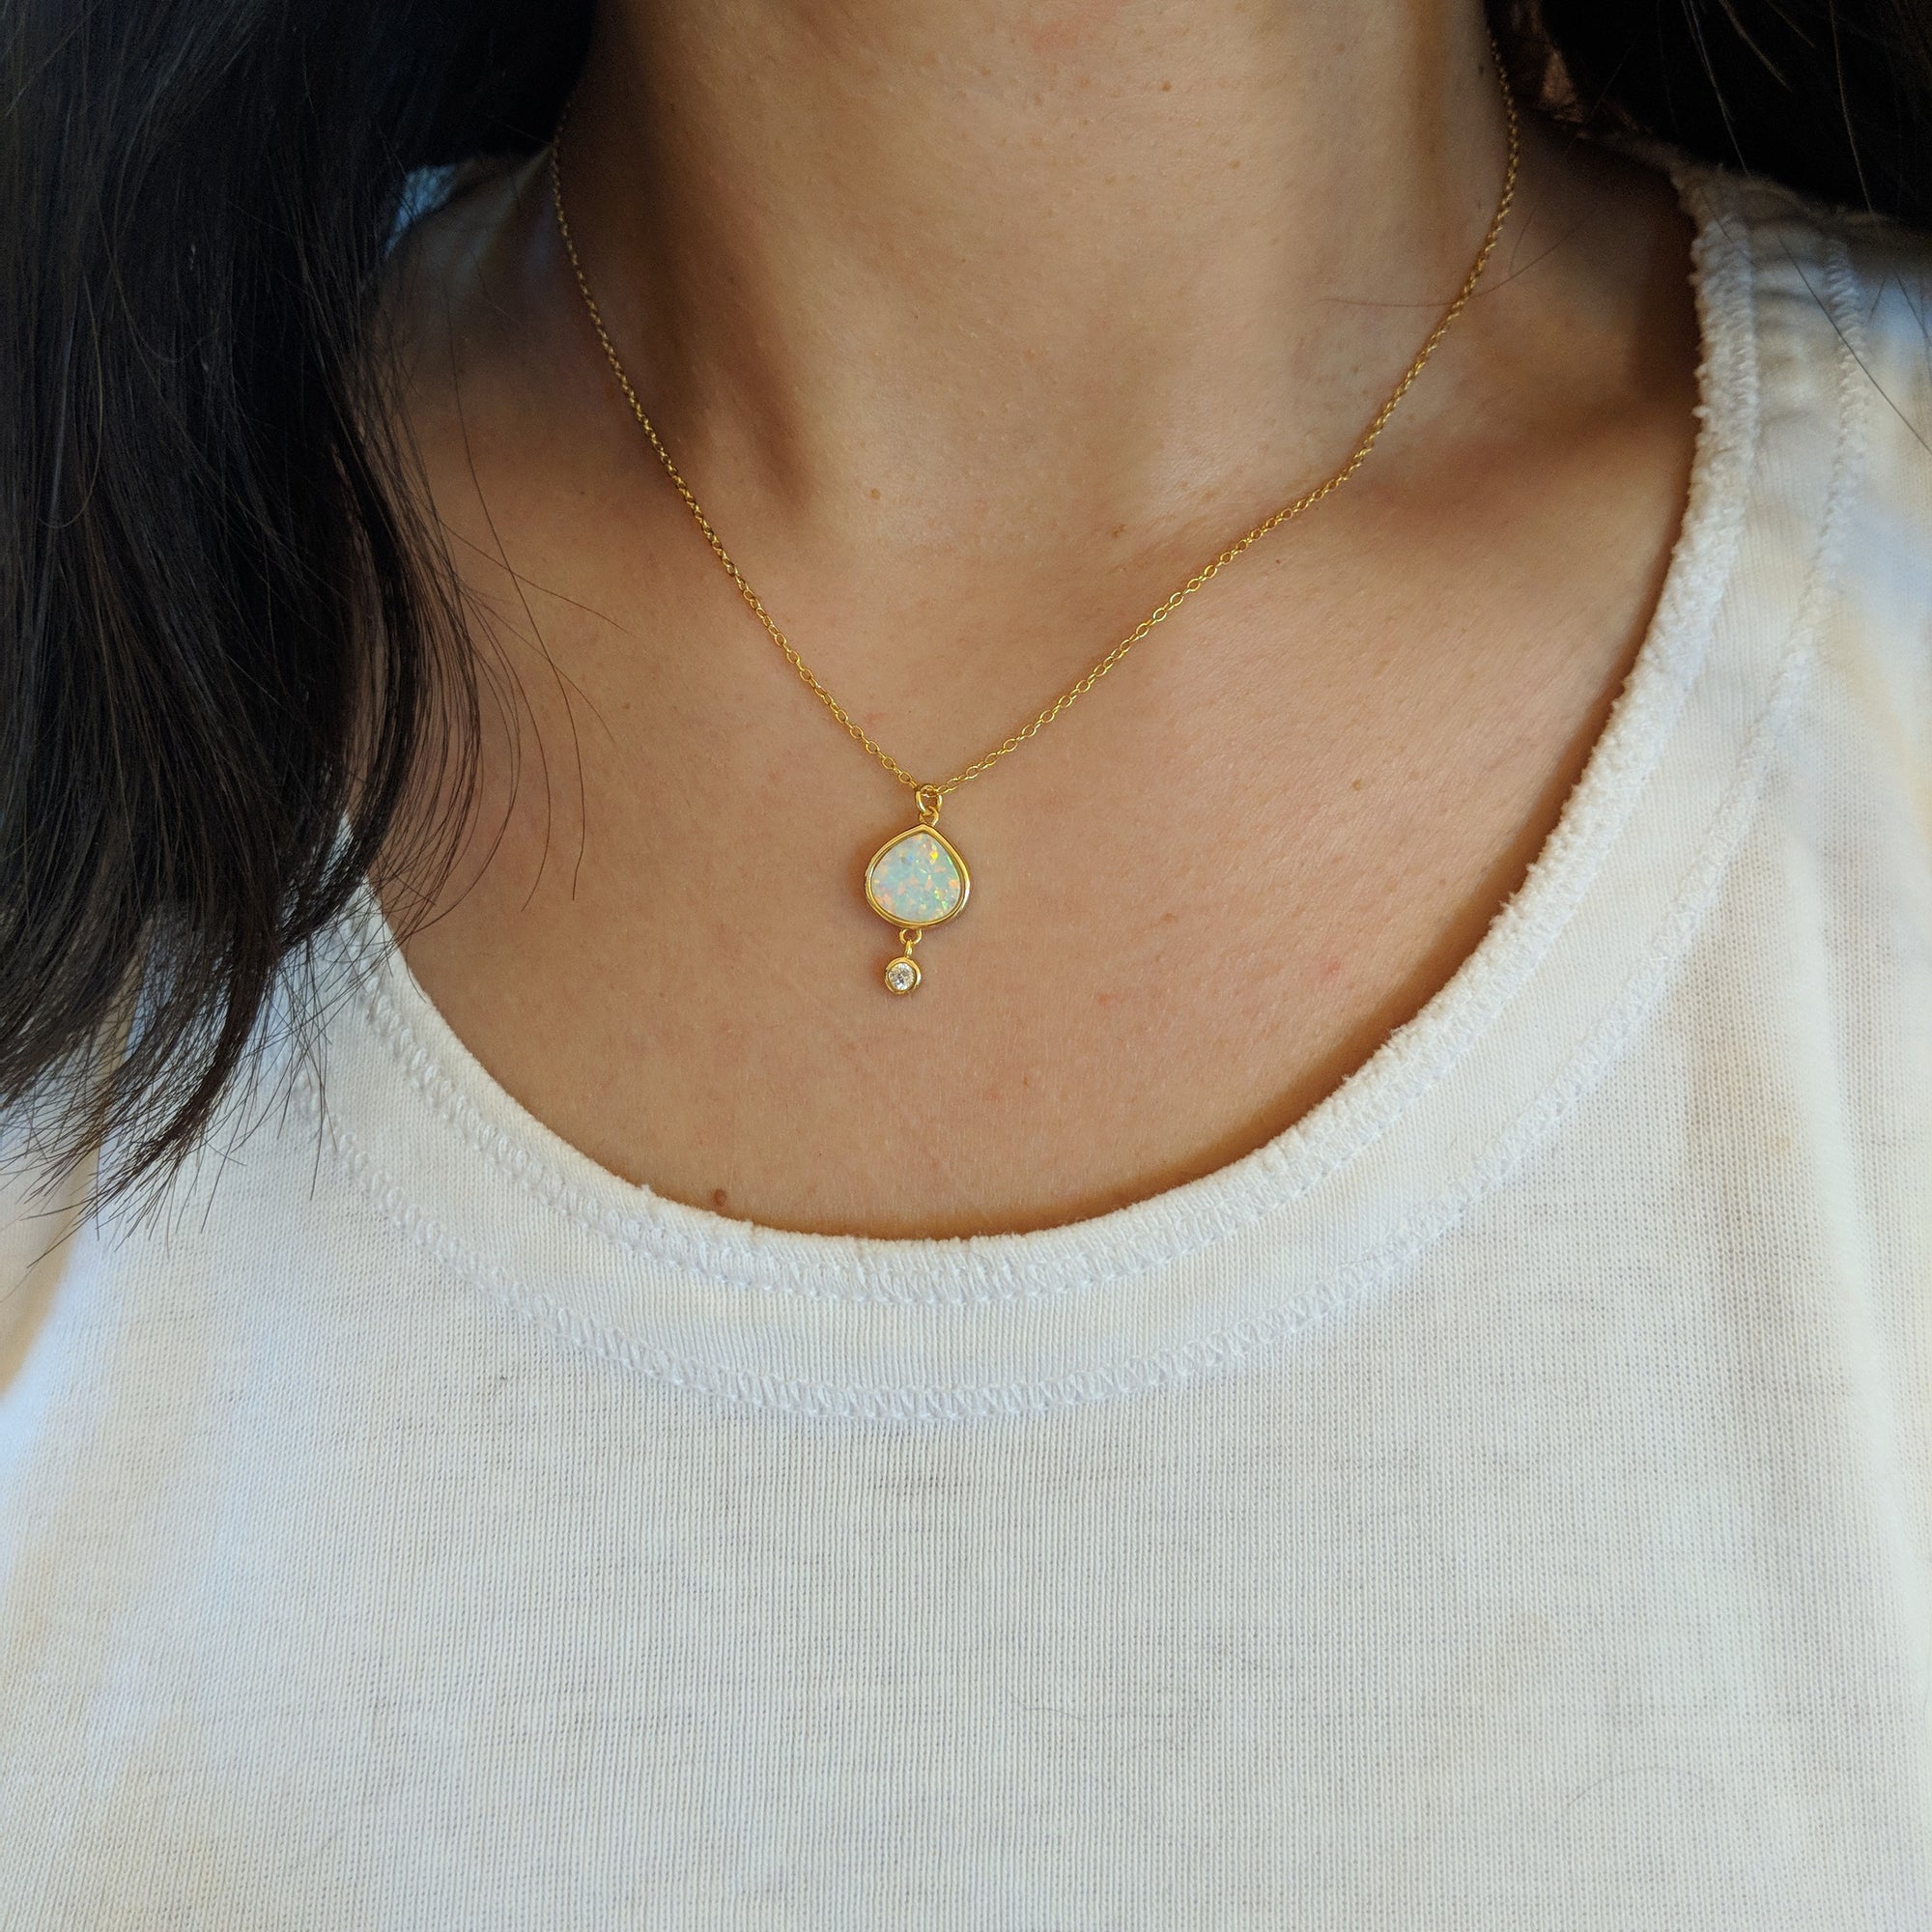 Best Friend white opal pear necklace with crystal drop